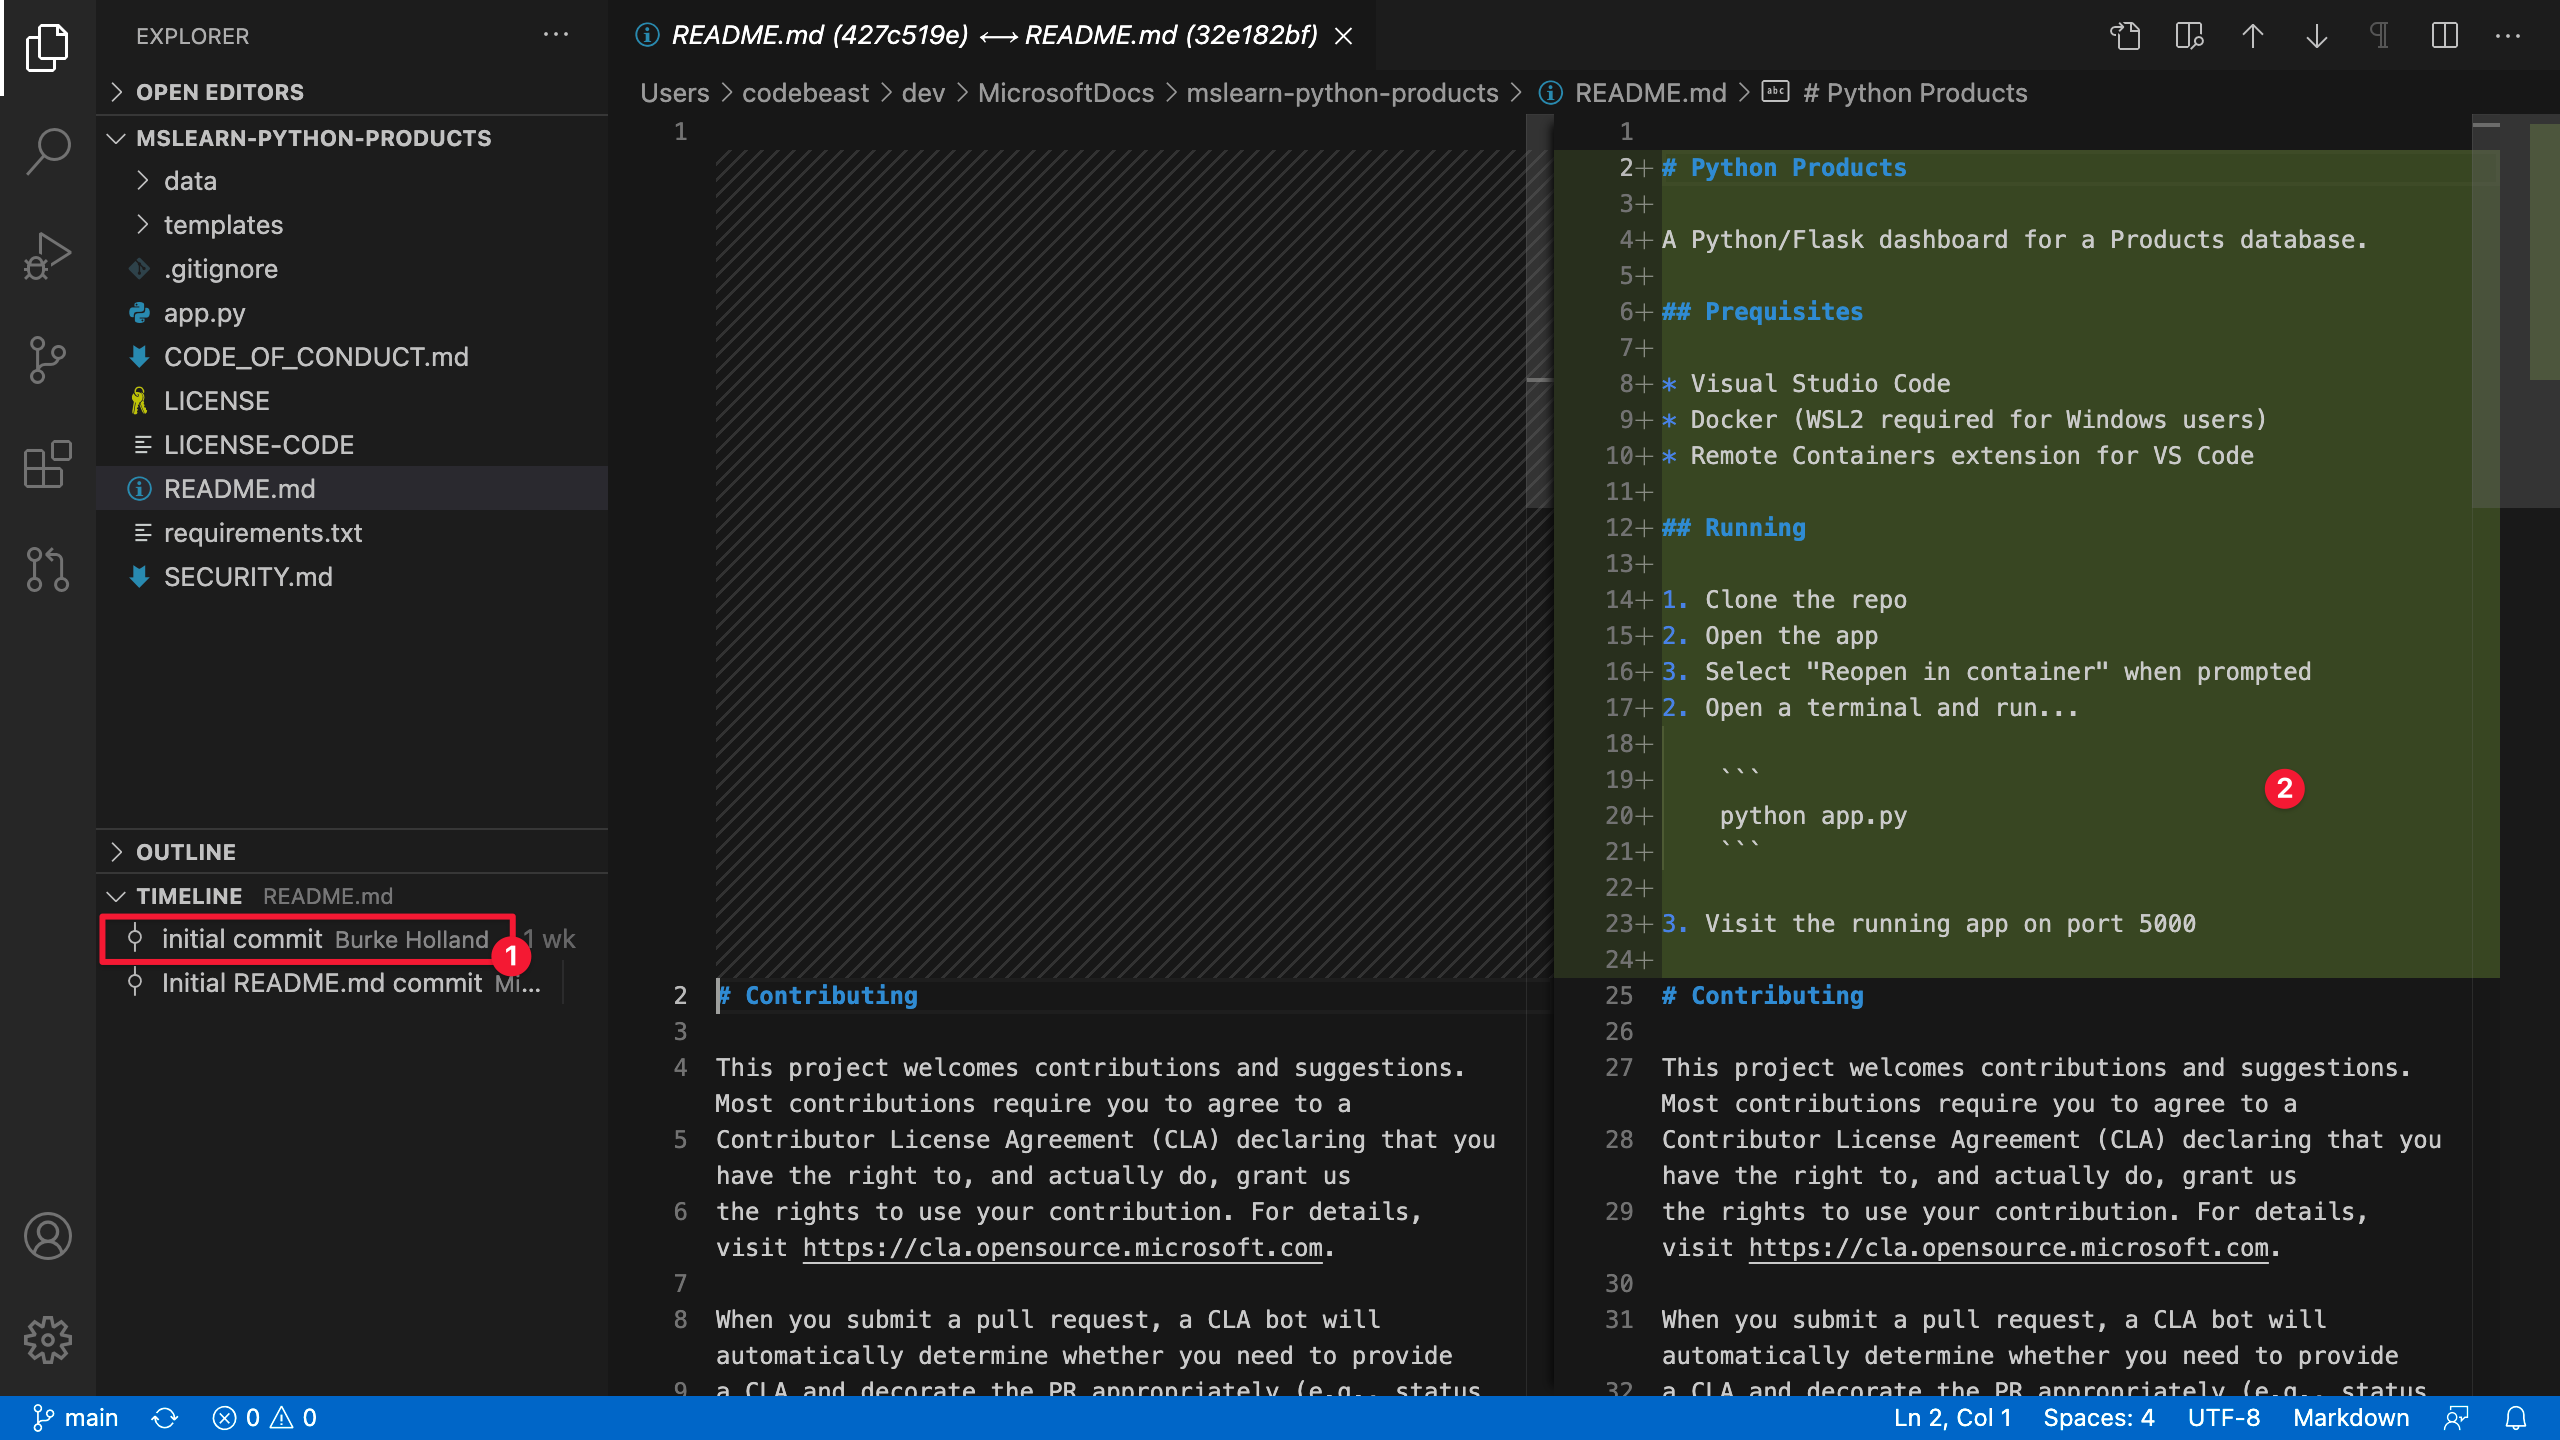 Screenshot of the Visual Studio Code diff editor, showing the differences in a file between two commits.